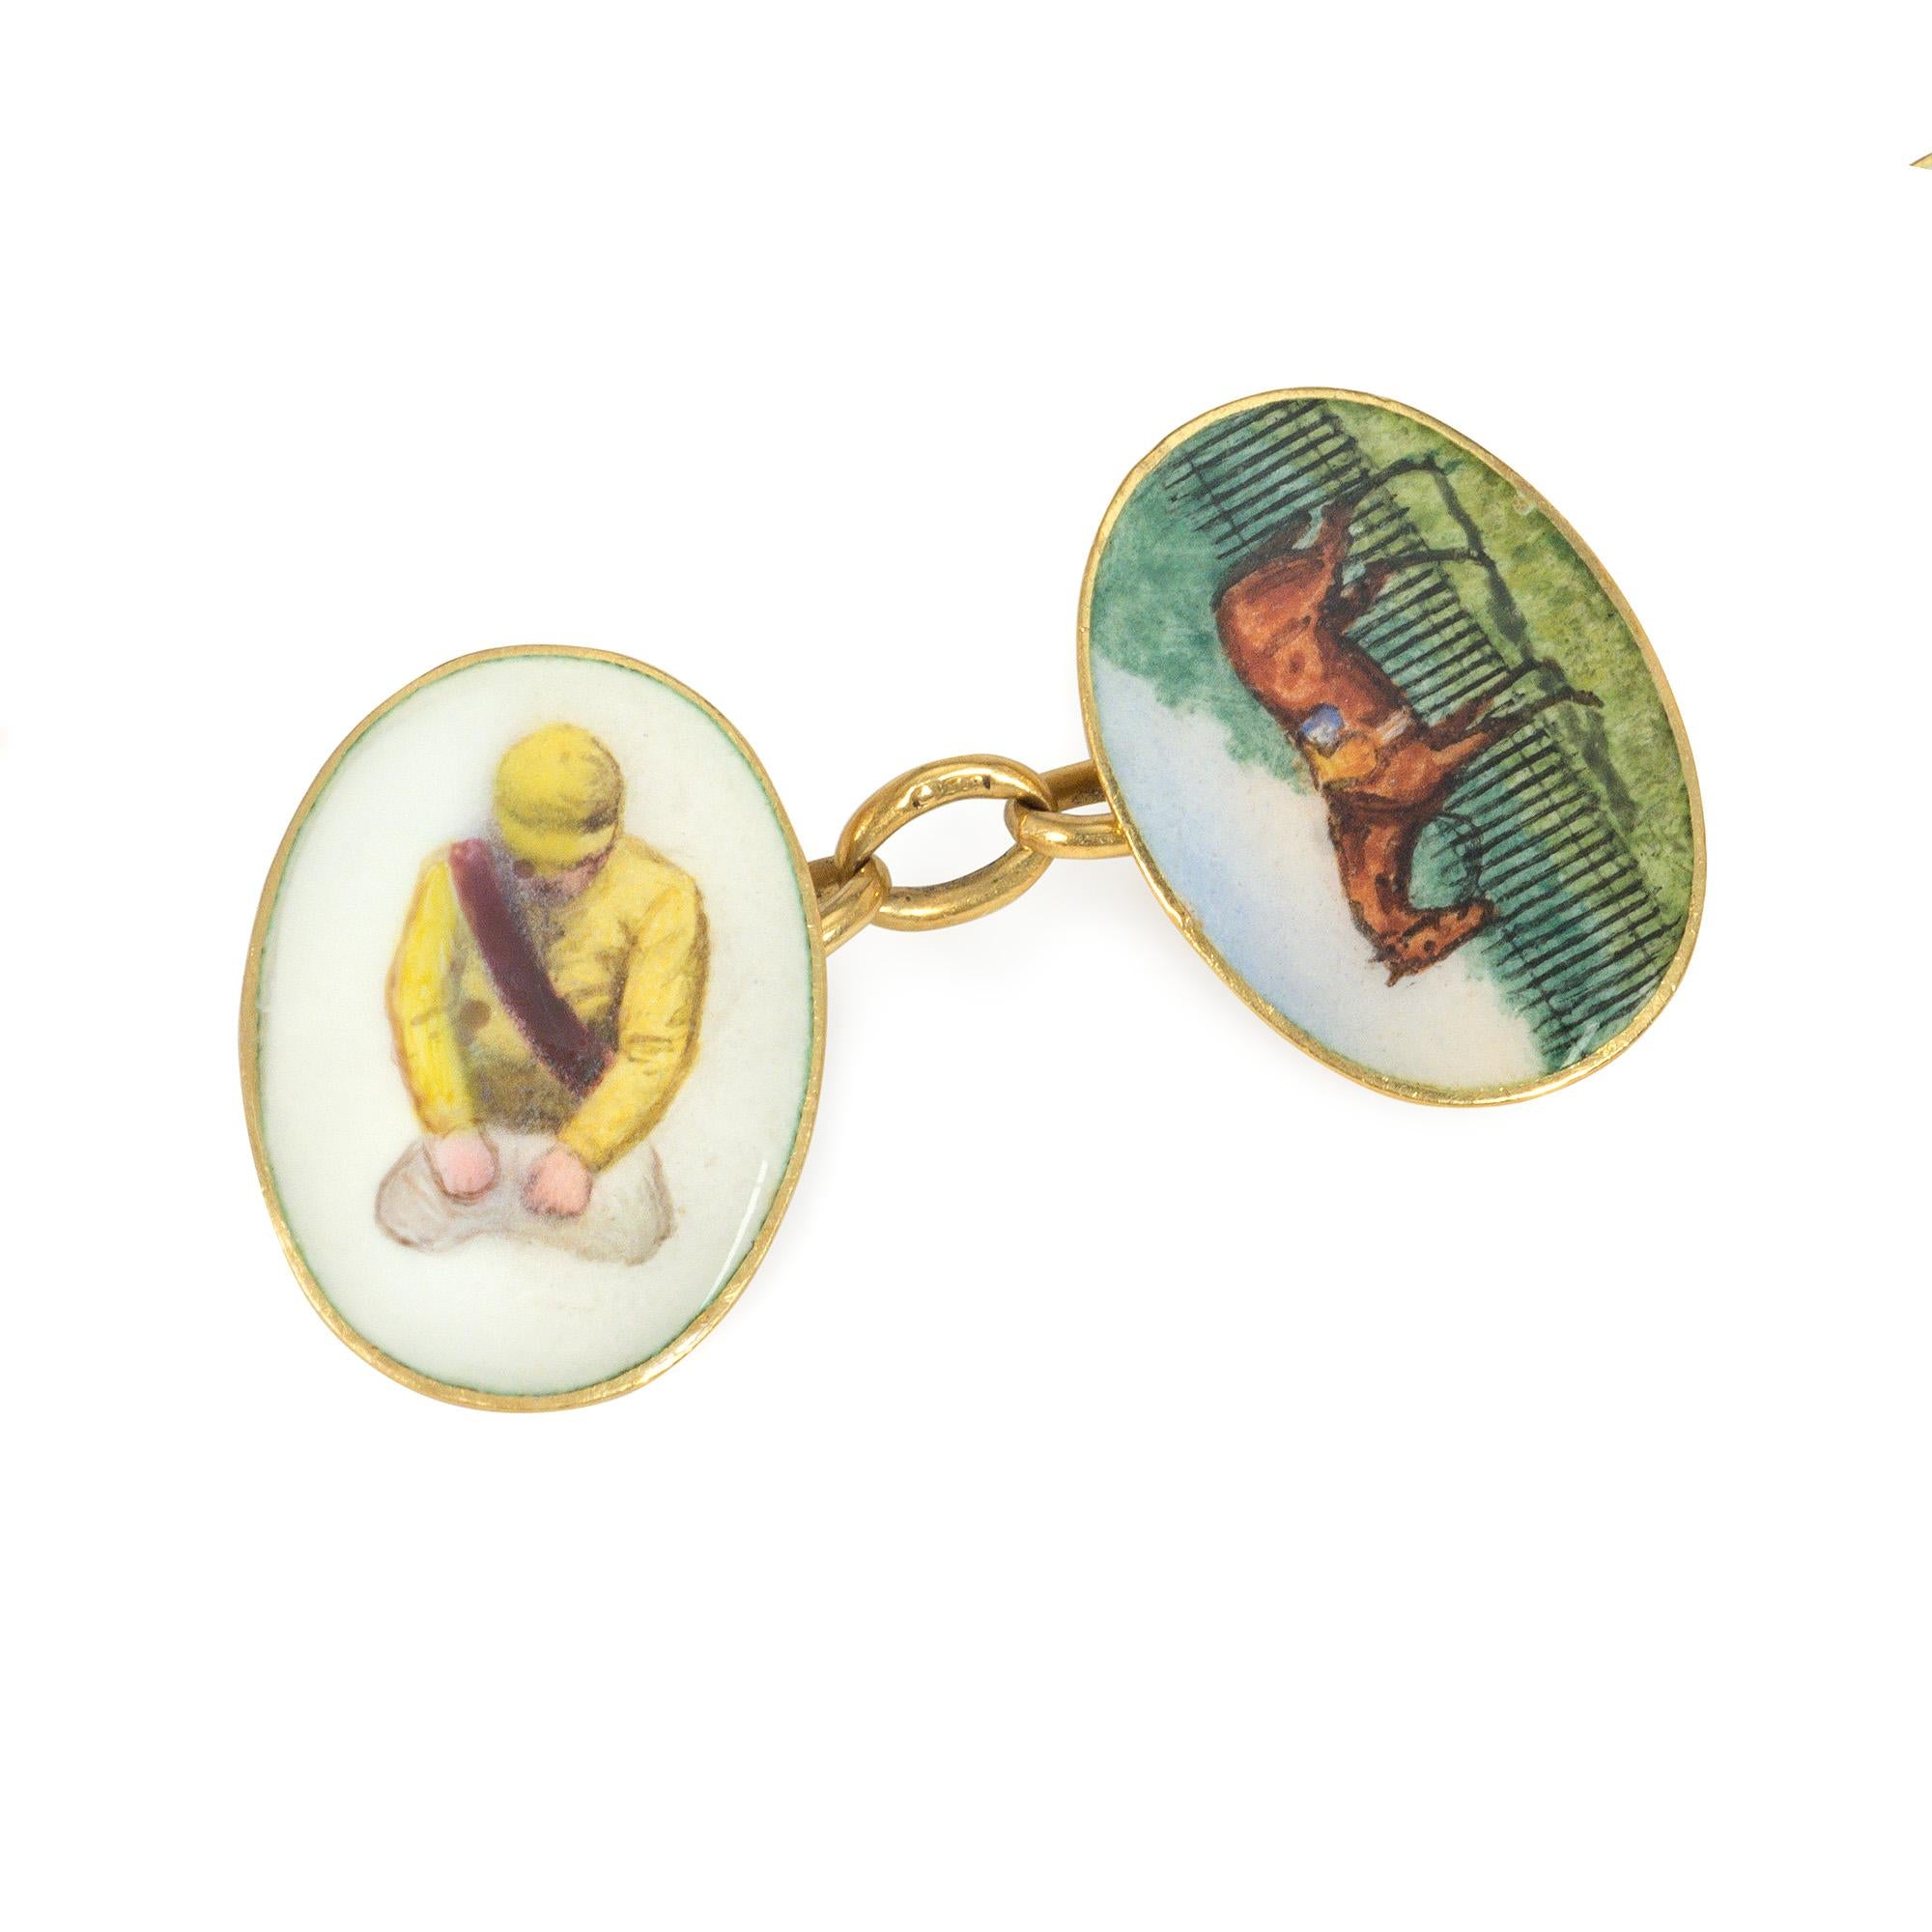 Antique Gold and Enamel Double Sided Cufflinks with Jockeys and Racehorses In Good Condition For Sale In New York, NY